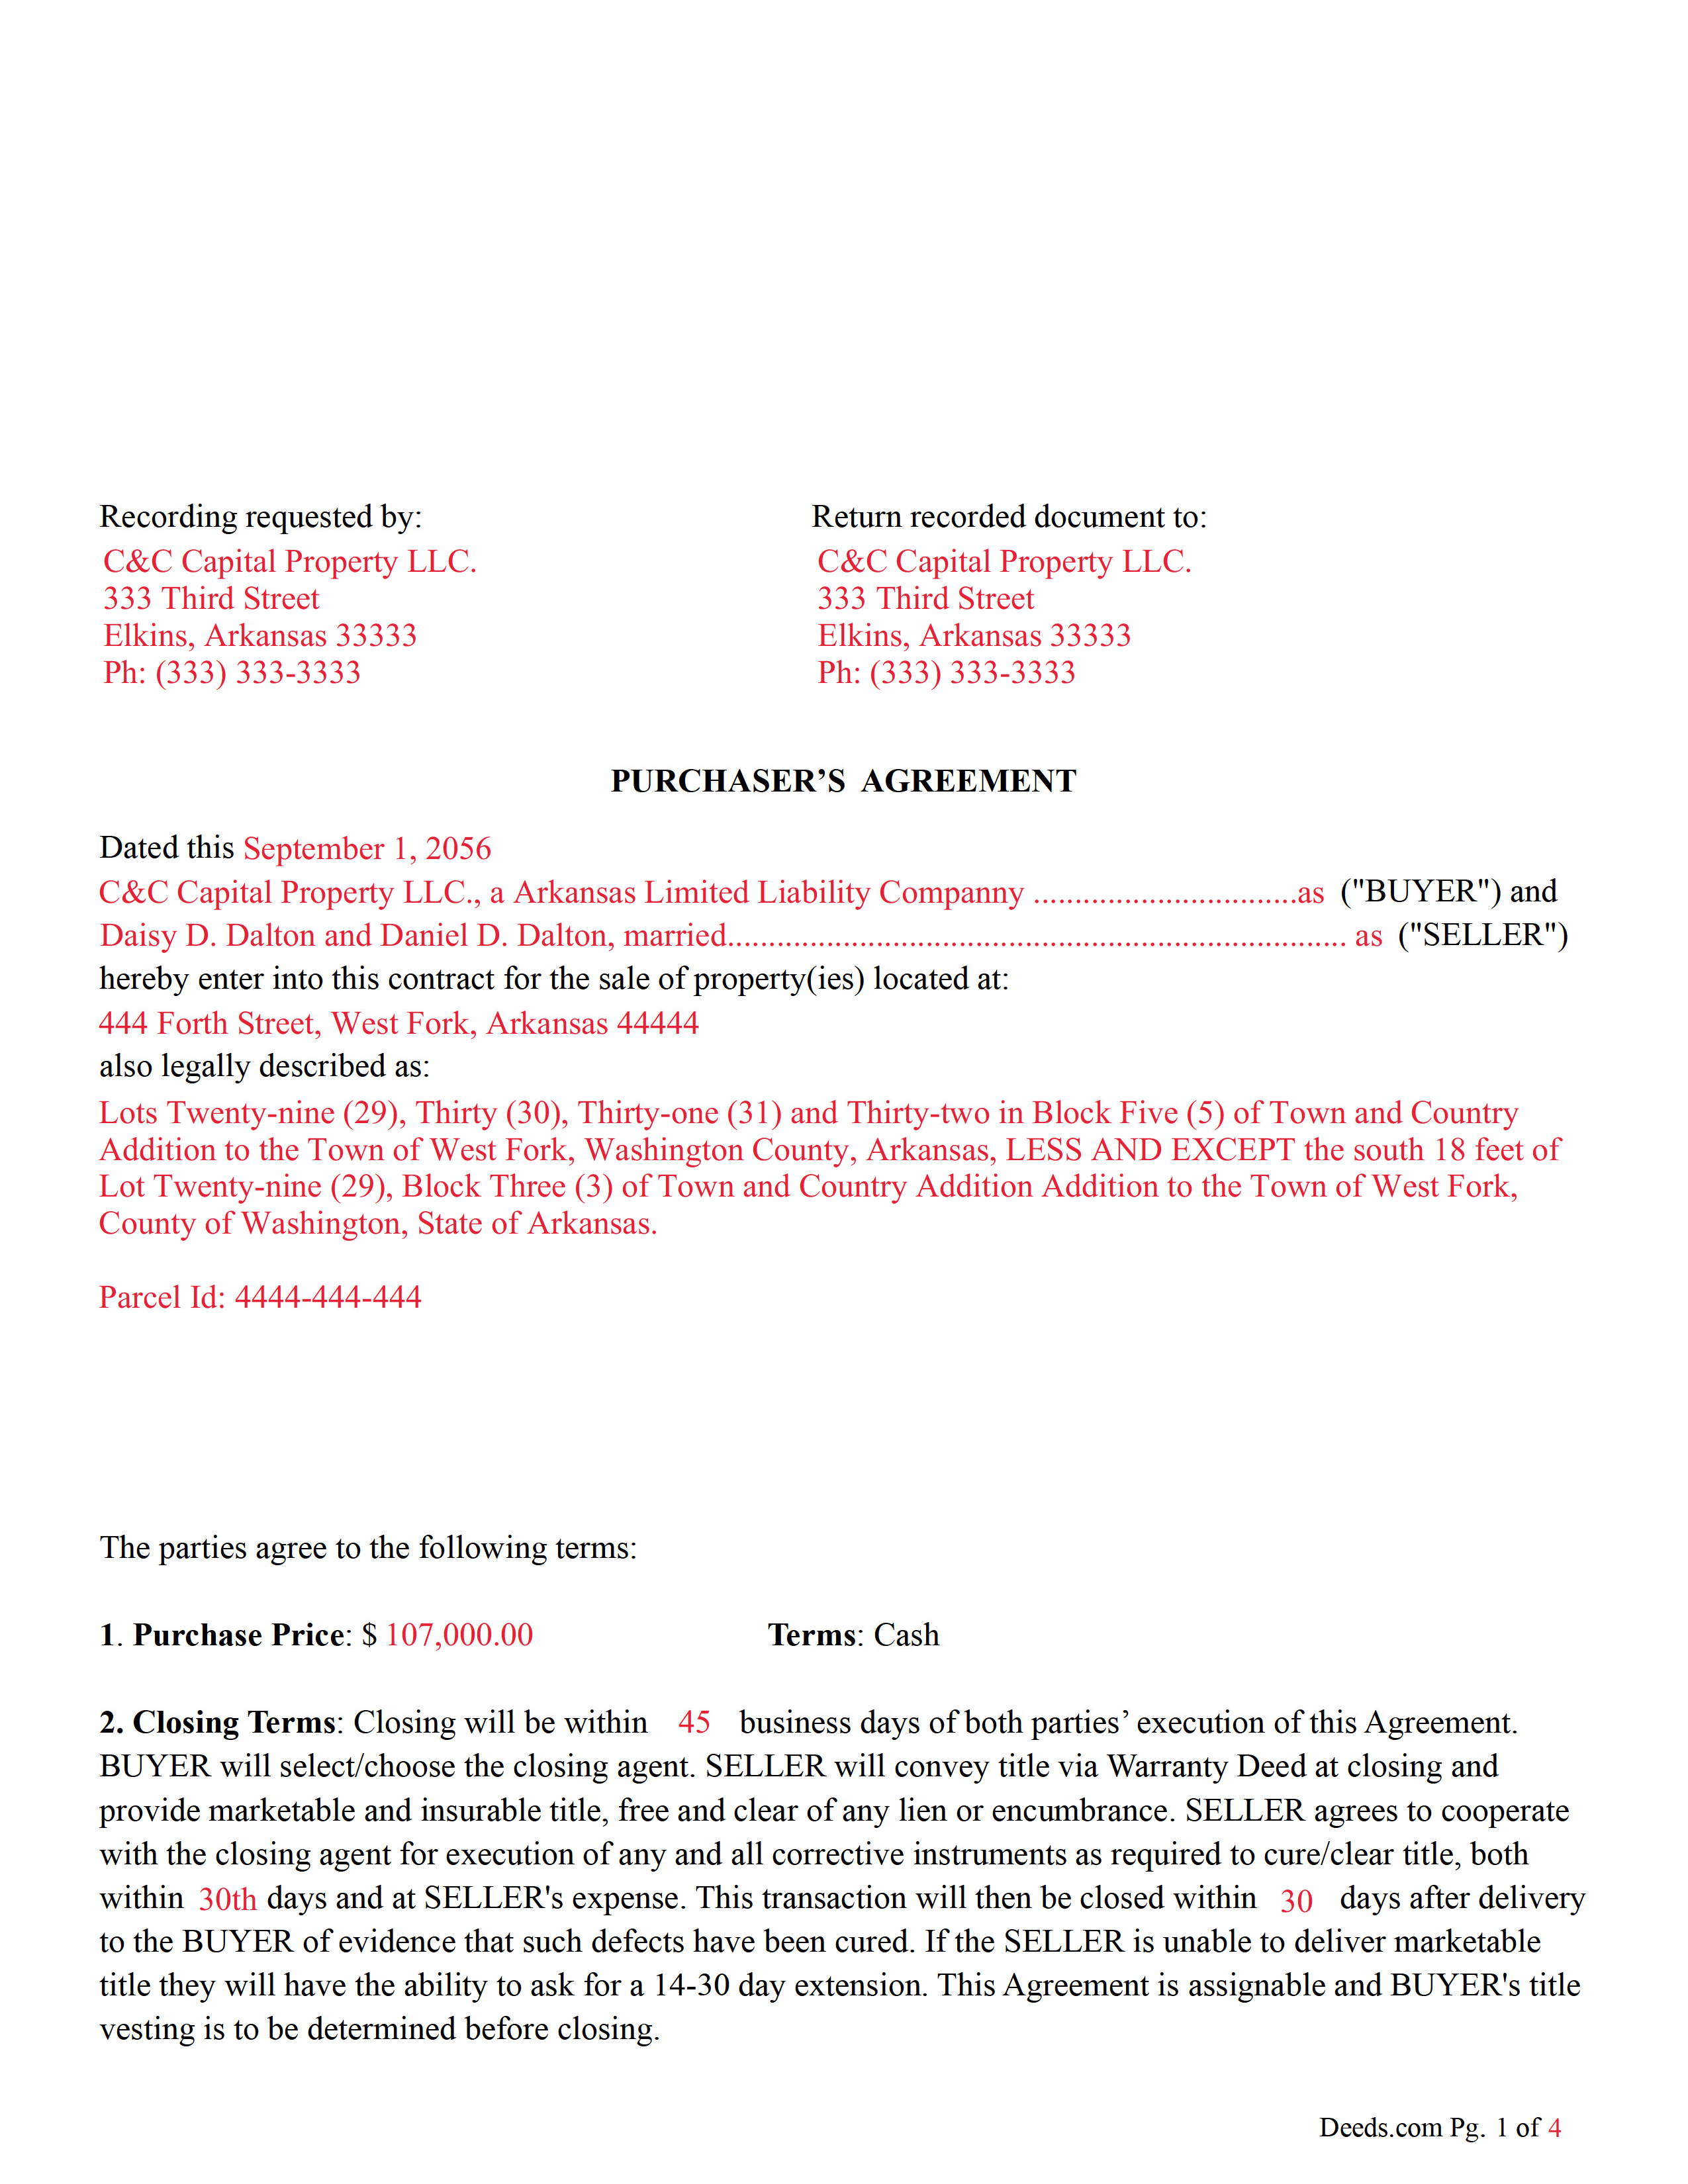 Completed Example of the Purchasers Agreement (Cash) Document